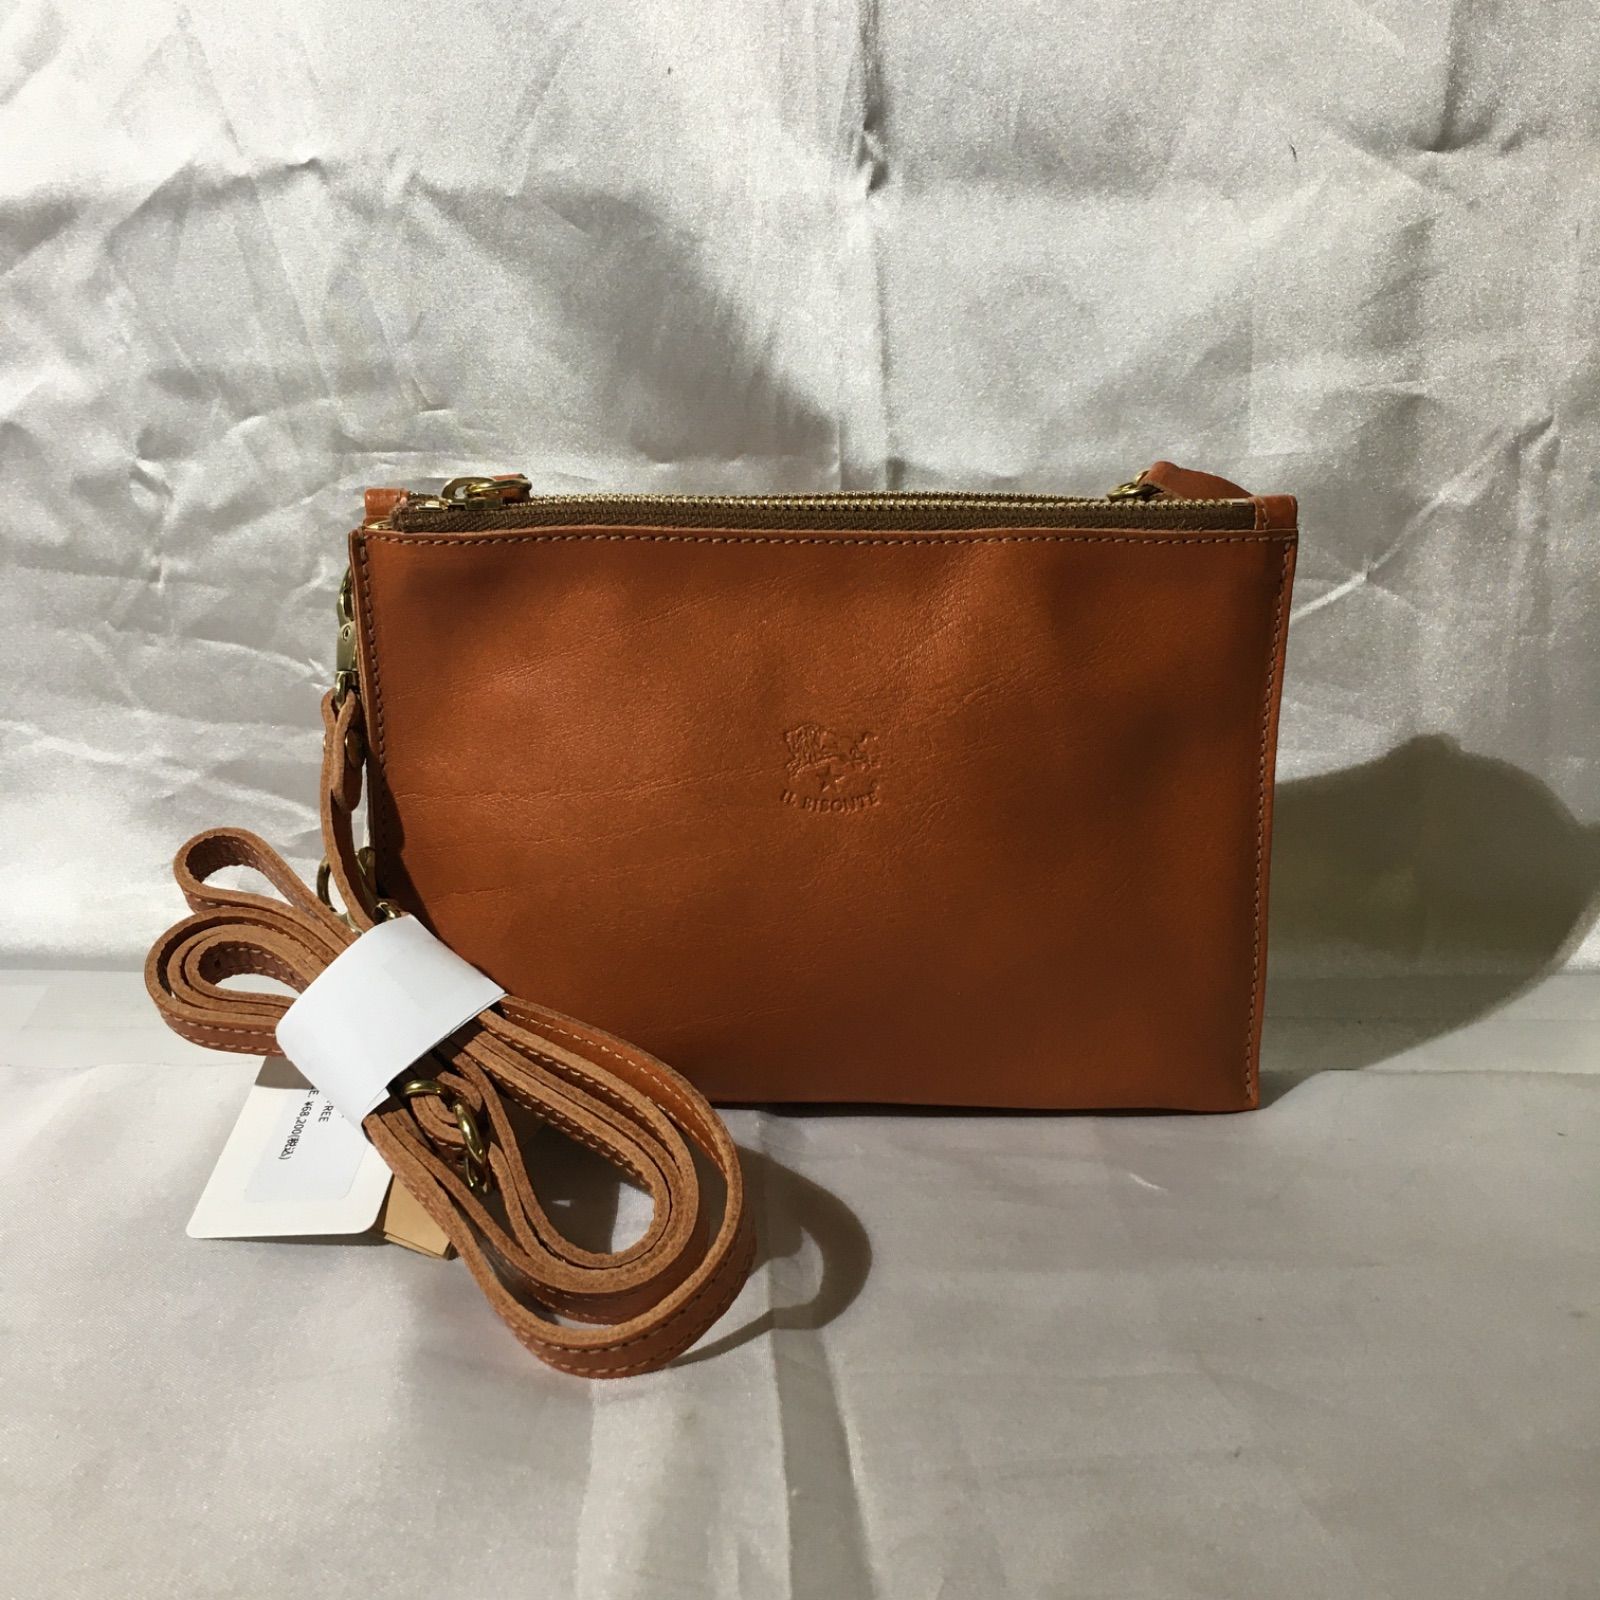 IL BISONTE CLUTCH SMALL BAG クロスボディバッグ ダブル クラッチ 